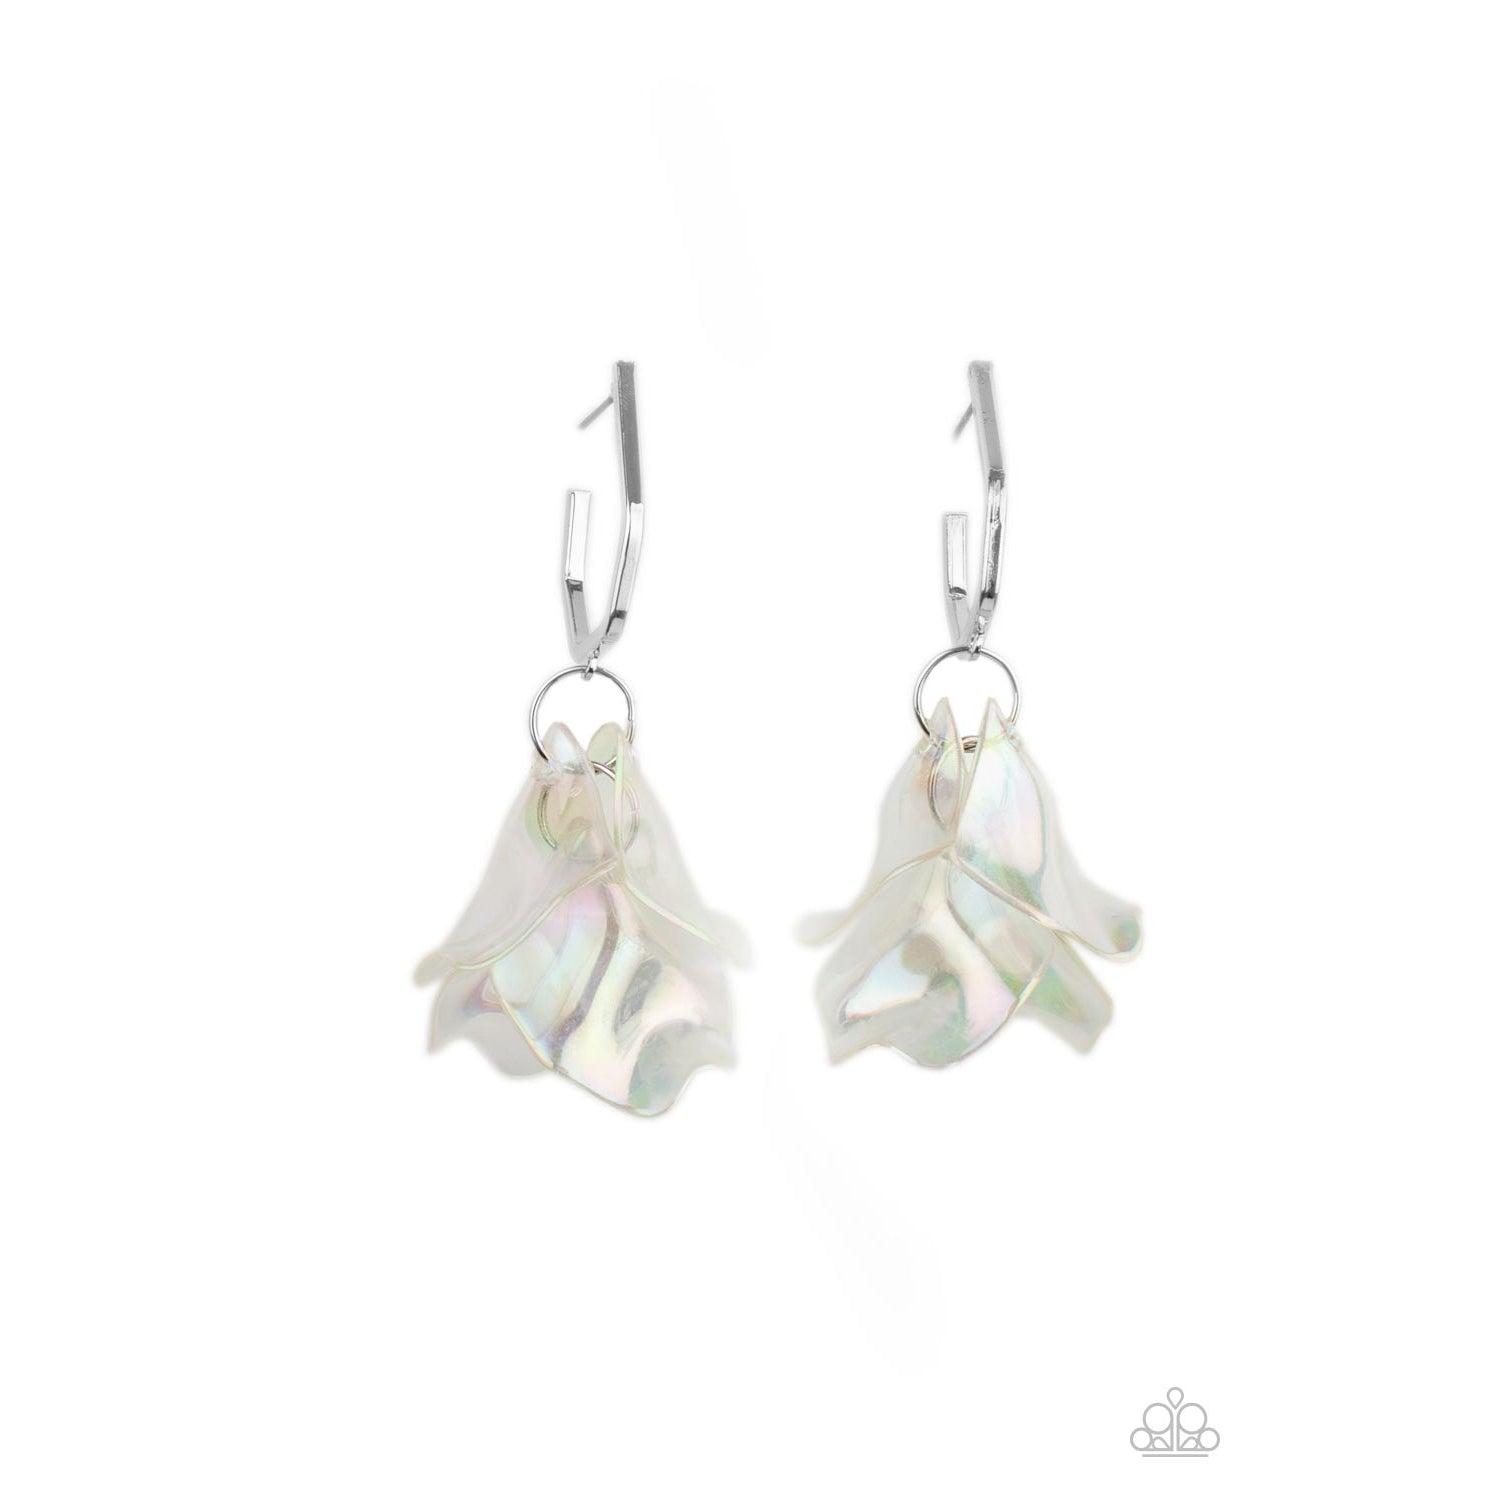 Jaw-Droppingly Jelly - Silver Iridescent Earrings - Paparazzi Accessories - GlaMarous Titi Jewels